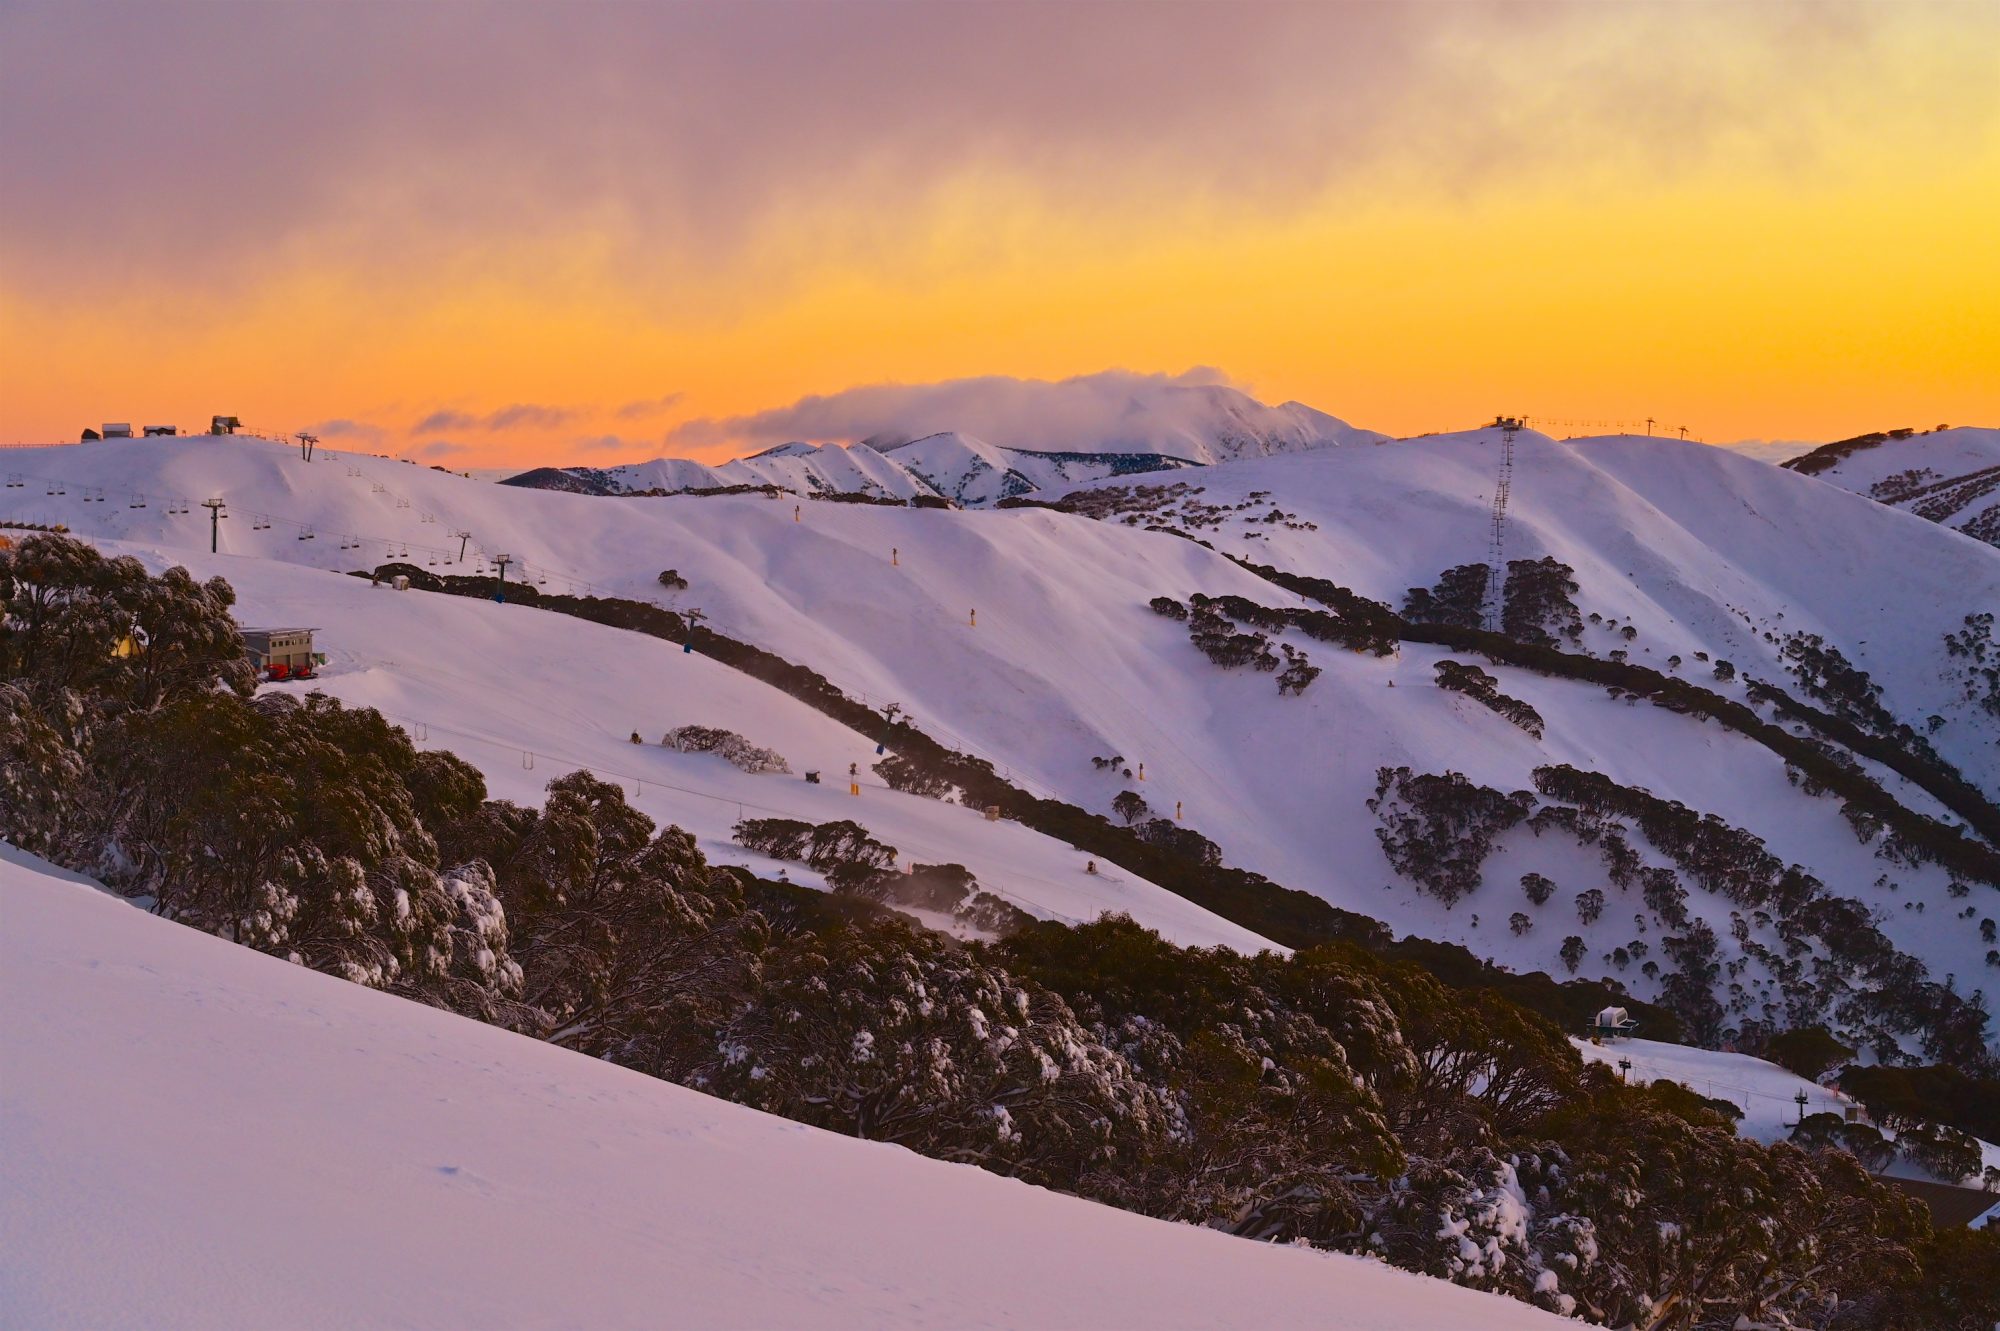 Glorious mountain views at Hotham Alpine Resort to end Autumn & start winter 2019. Epic Australia Pass Now Includes Unlimited, Unrestricted Access to Hotham Alpine Resort with Sales Deadline Extended to 18 June.